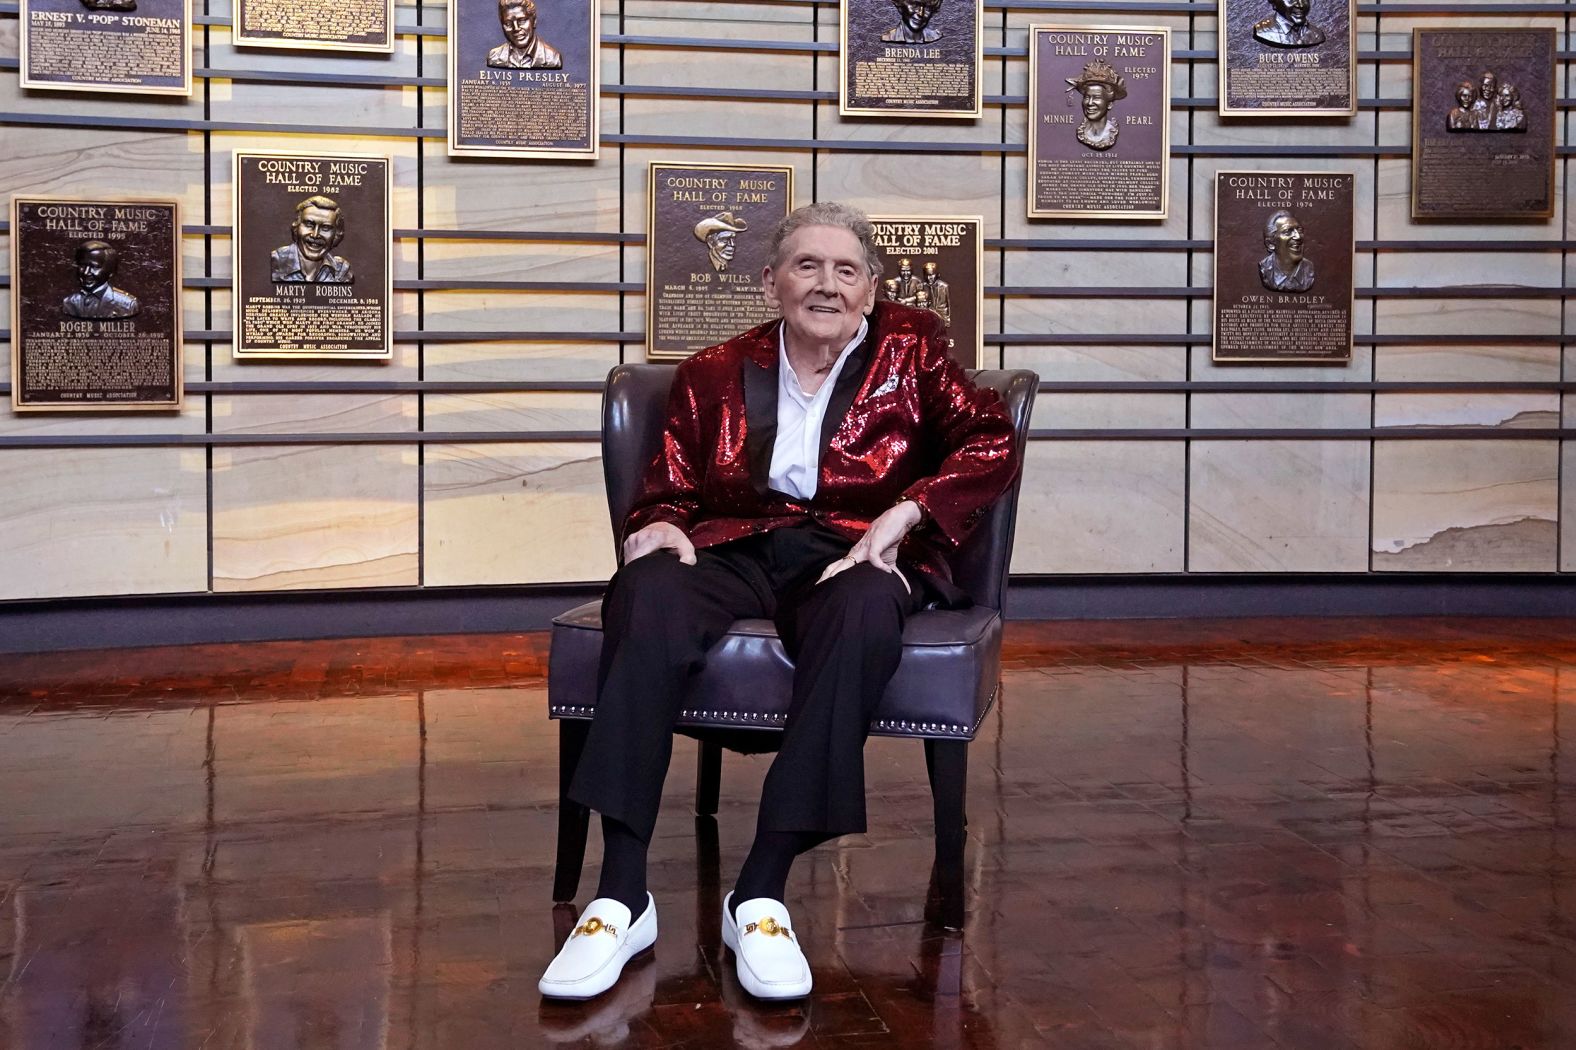 Lewis sits for a picture at the Country Music Hall of Fame after it was announced in May 2022 that he would be inducted as a member. He was unable to attend the ceremony in October because he was ill with the flu, according to a statement posted to his social media.